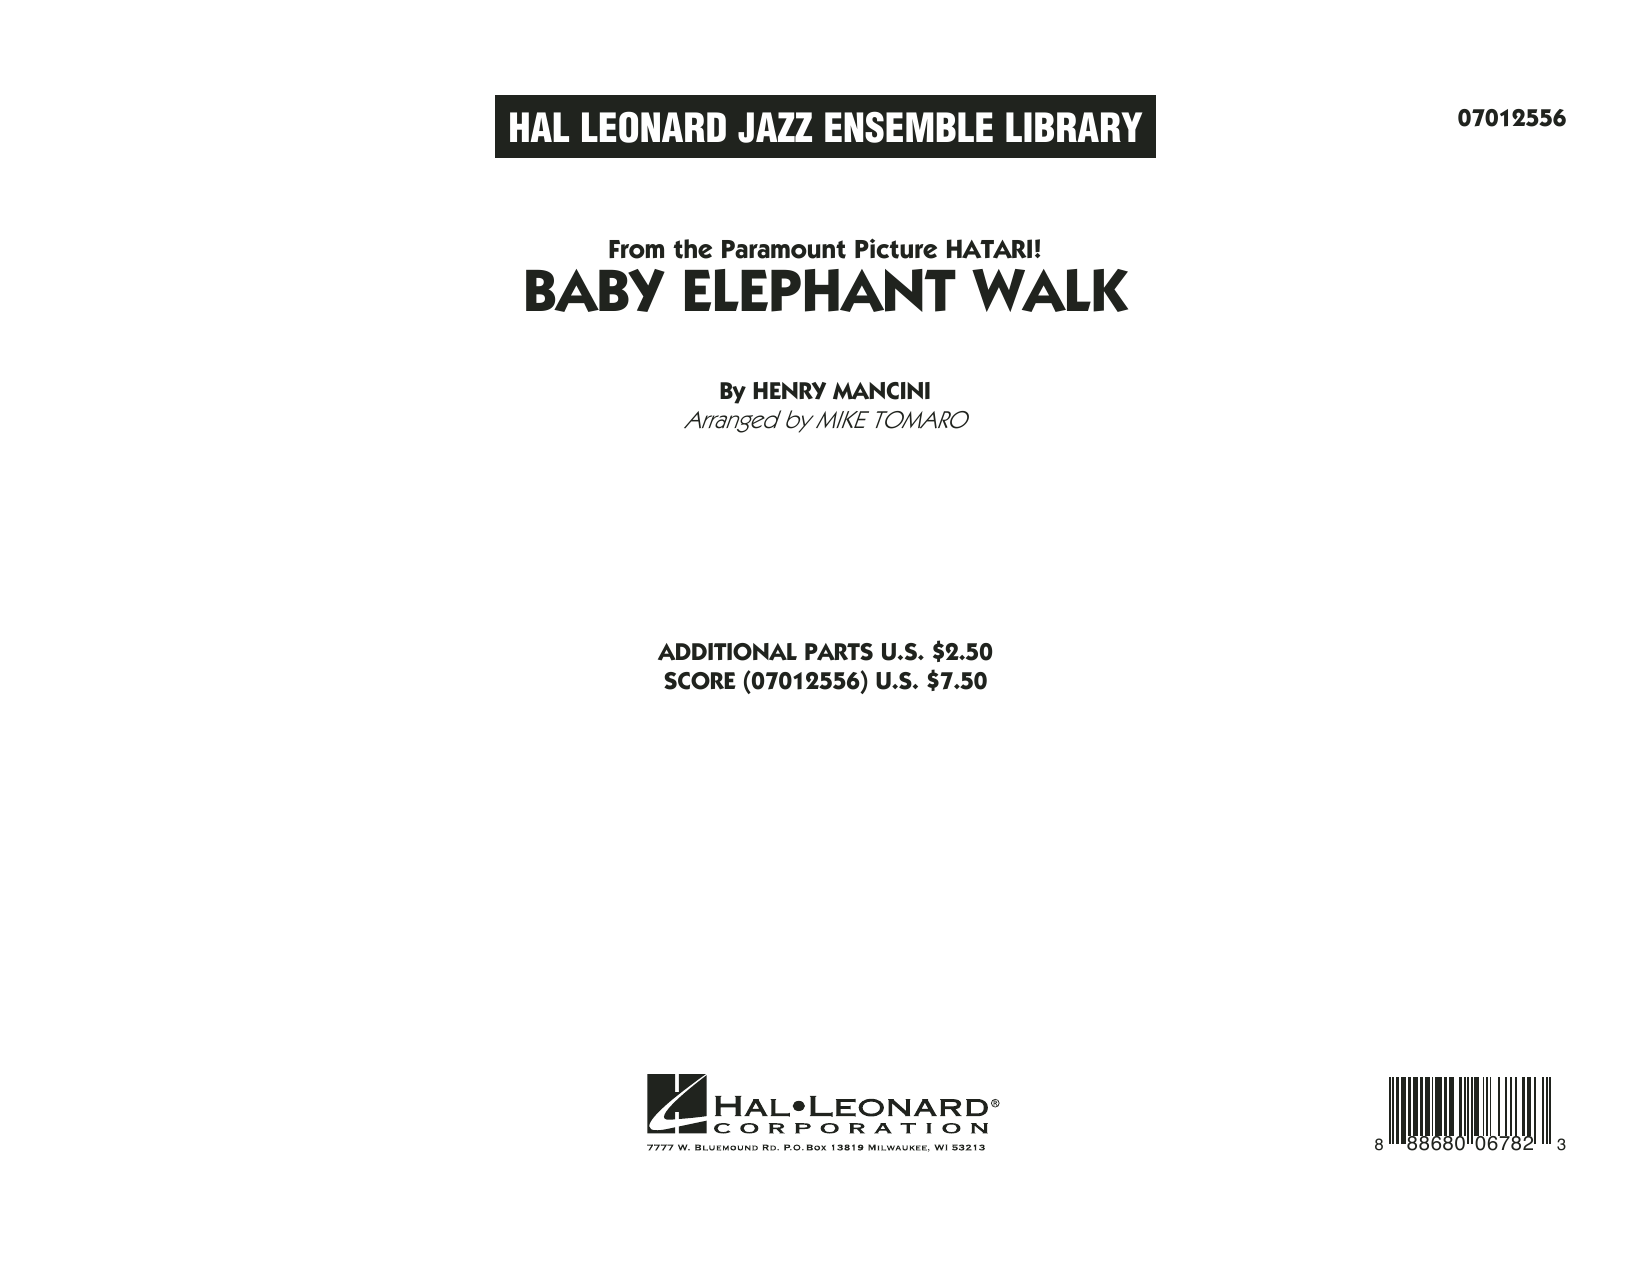 Mike Tomaro Baby Elephant Walk - Conductor Score (Full Score) sheet music notes and chords. Download Printable PDF.